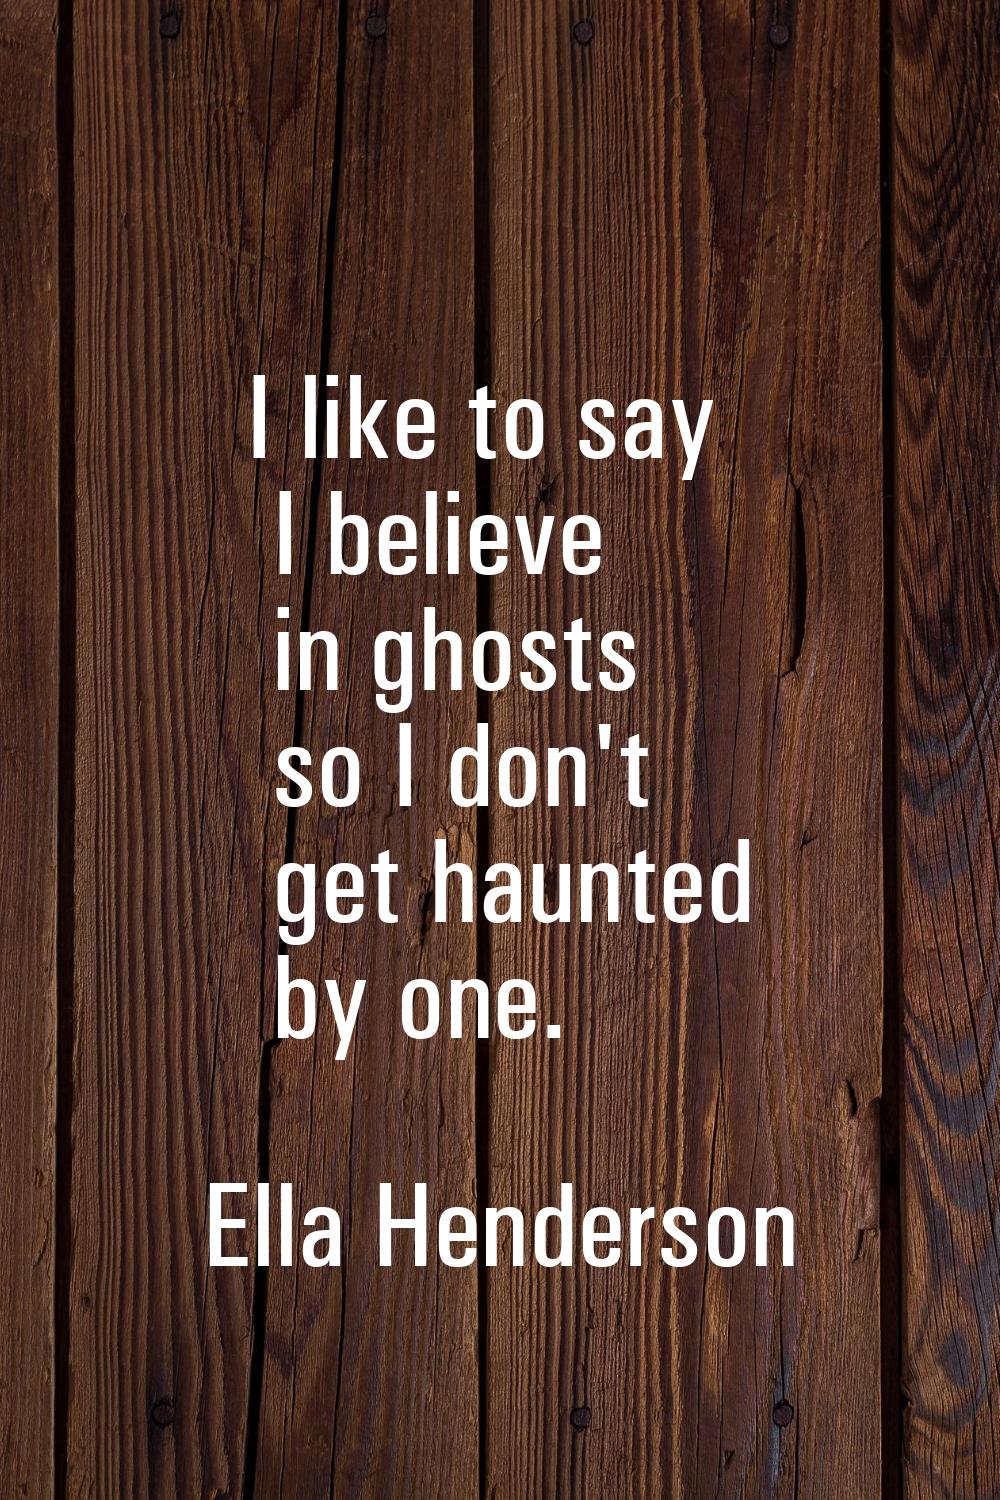 I like to say I believe in ghosts so I don't get haunted by one.